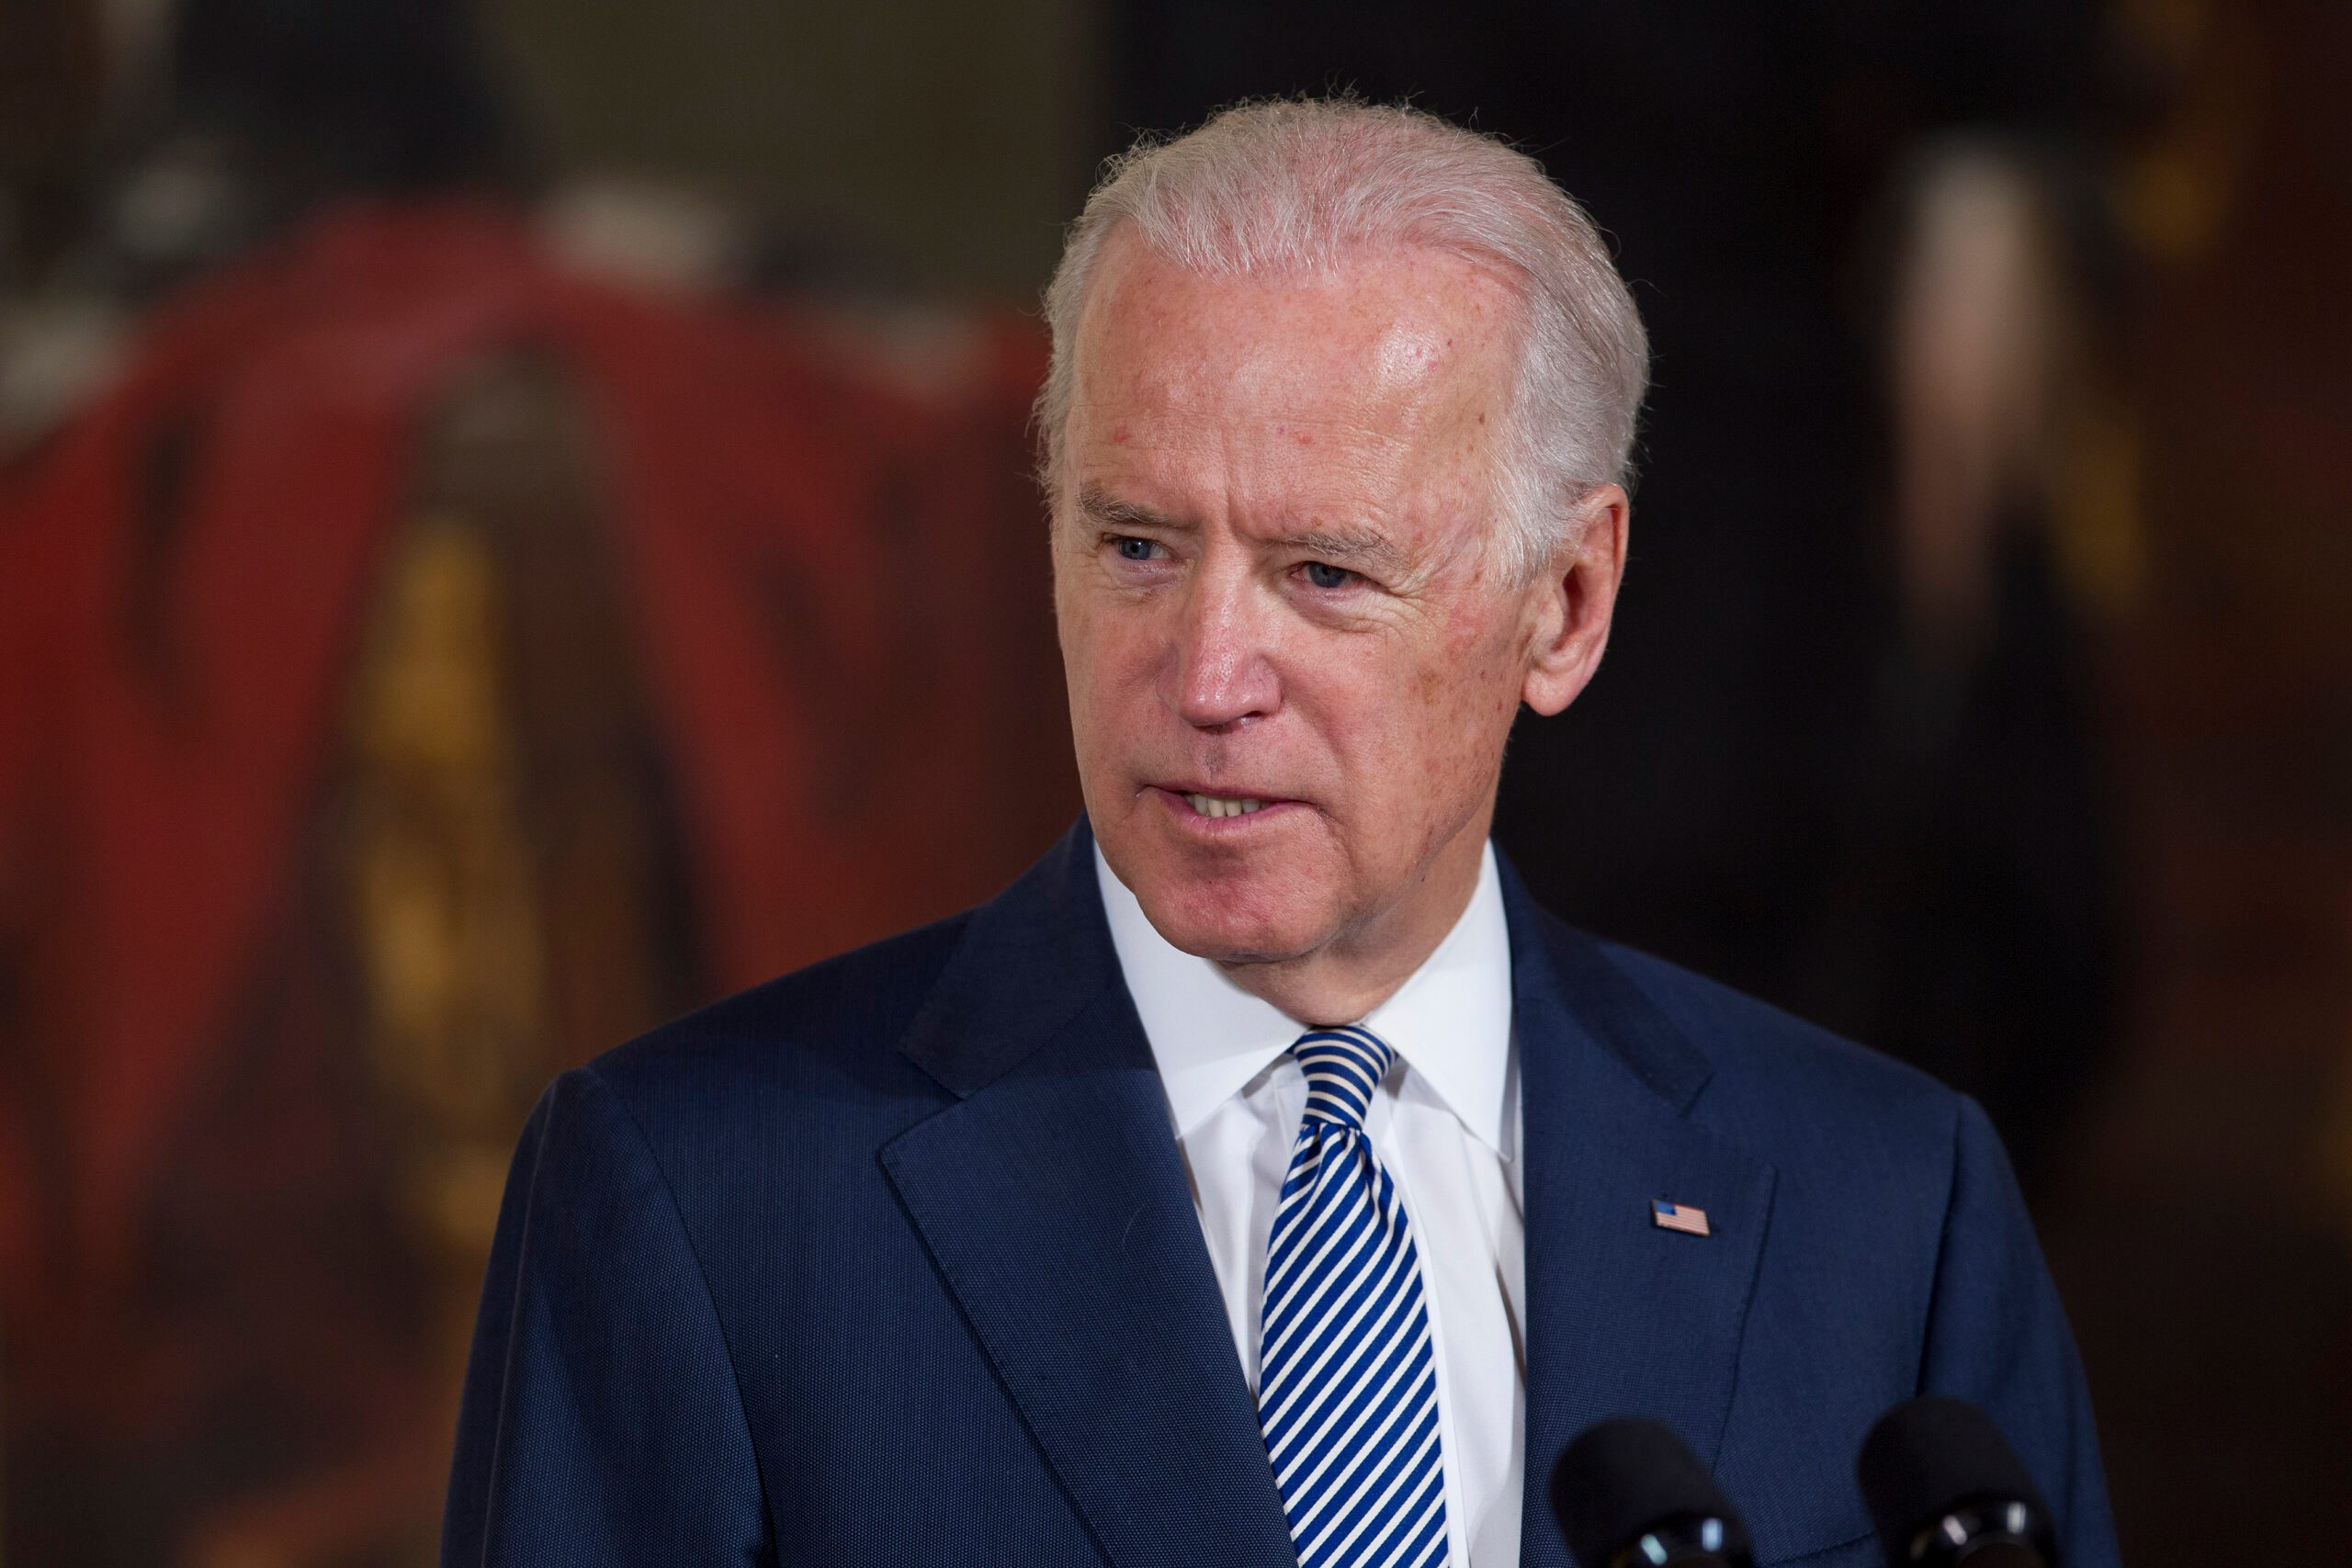 China must abide by same rules as everyone else – Biden